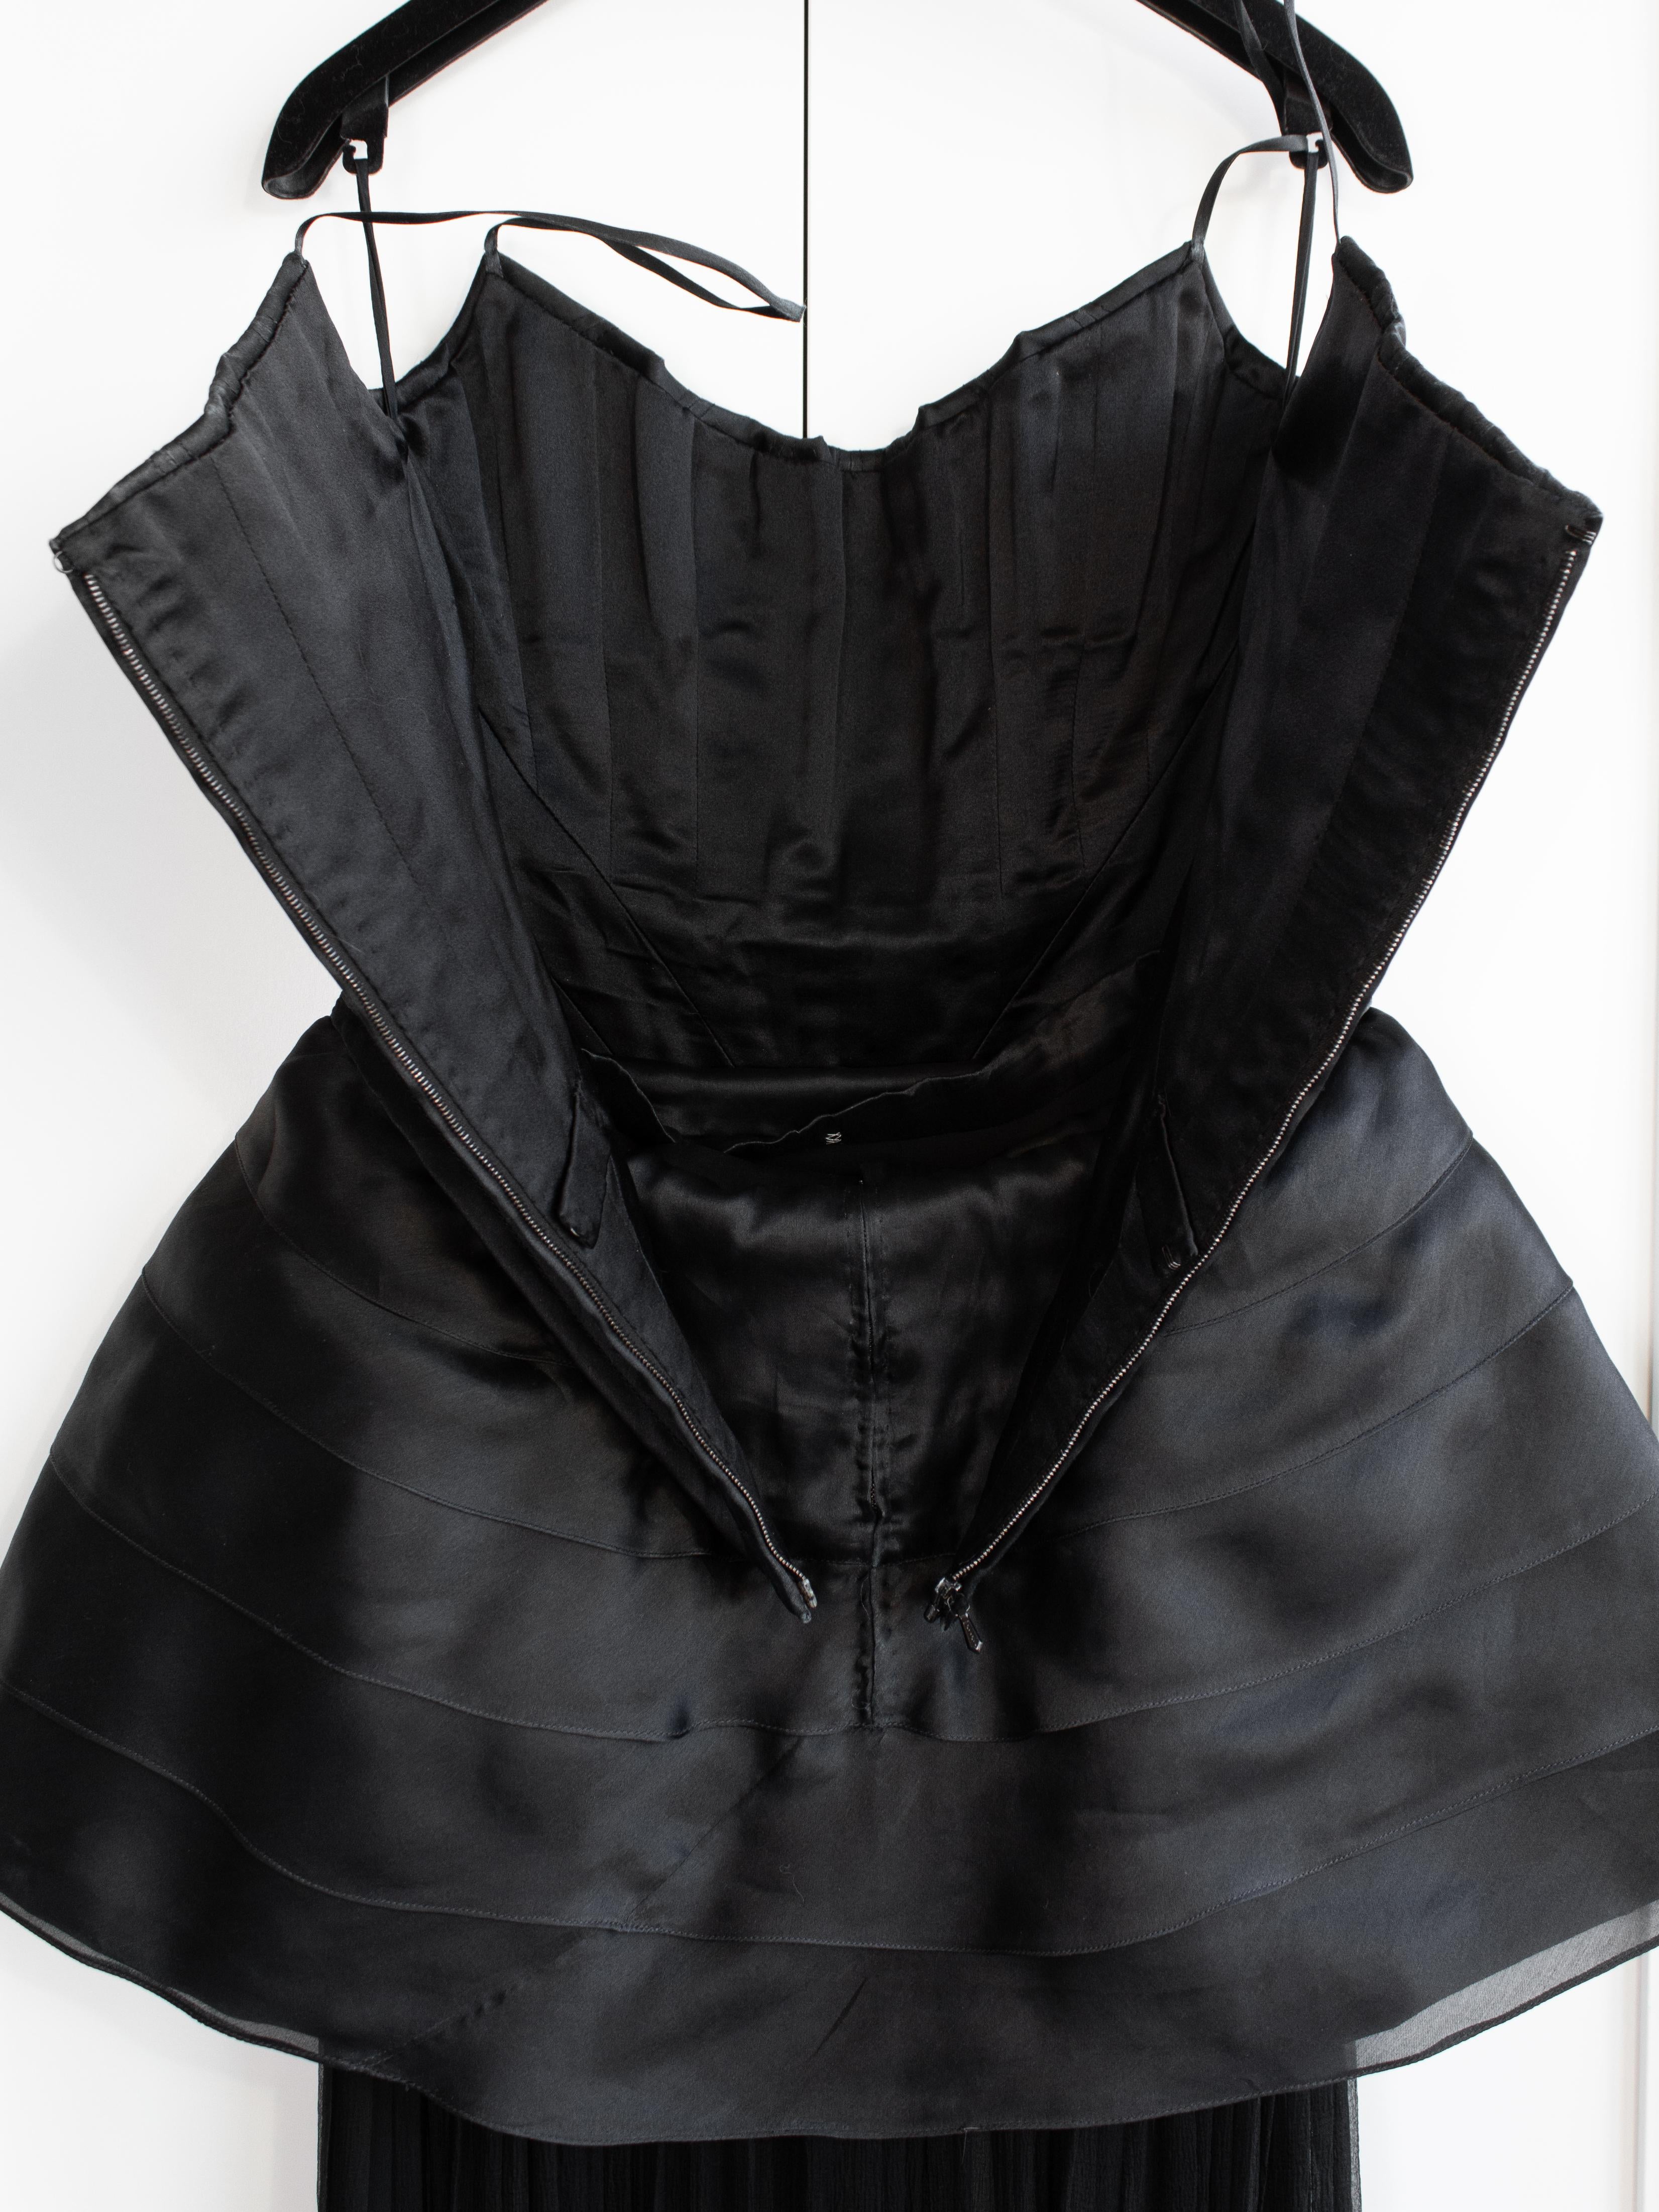 Chanel Vintage Haute Couture Fall/Winter 1992 Black Satin Corset Gown Dress For Sale 8